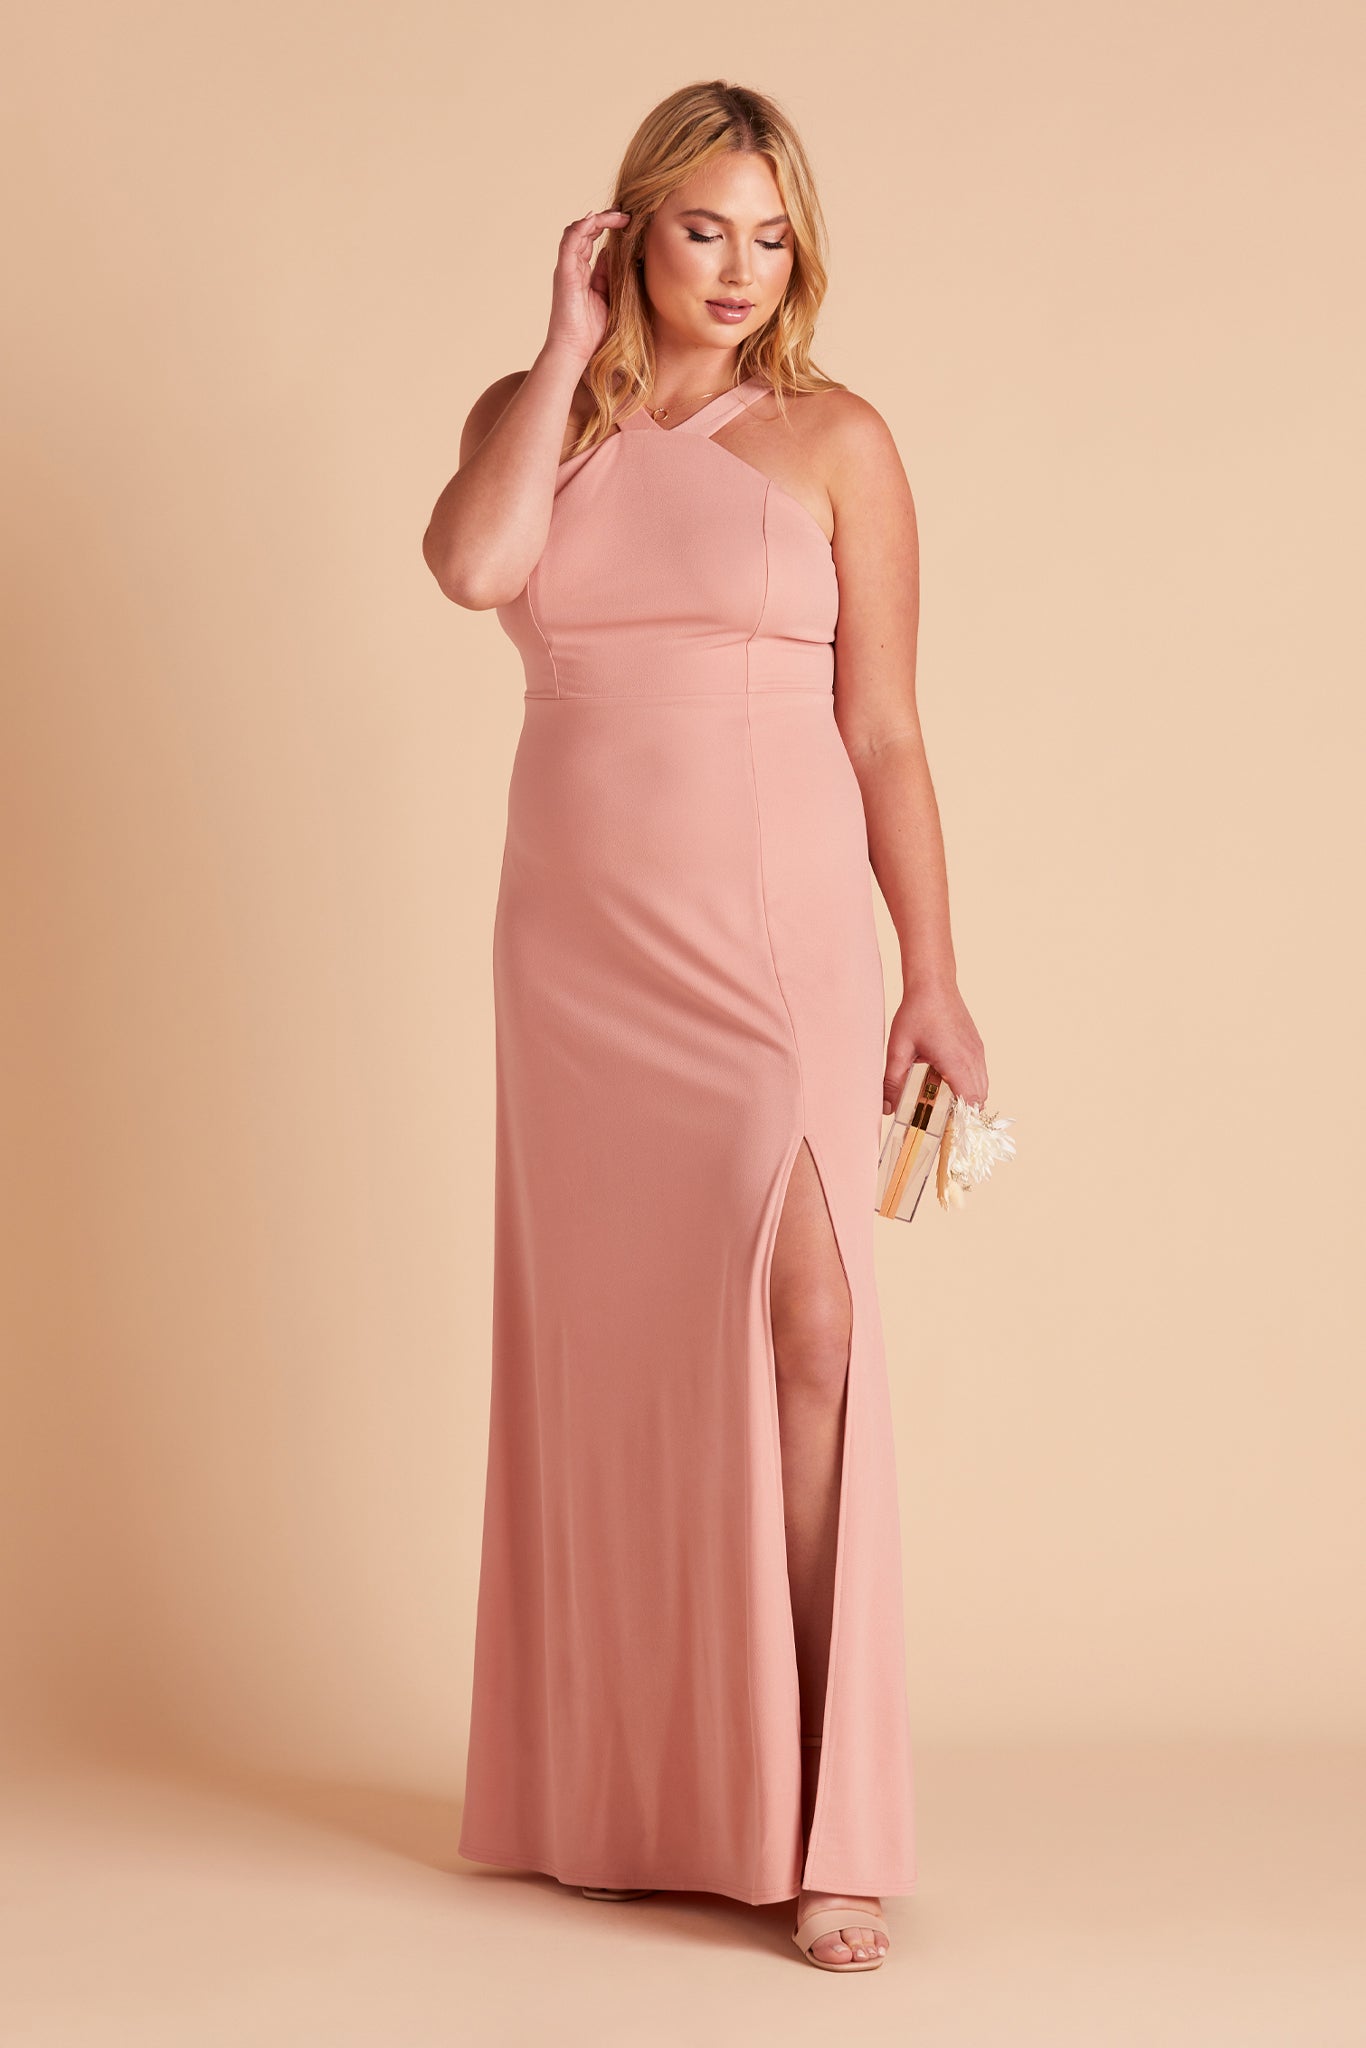 Gene plus size bridesmaid dress with slit in dusty rose crepe by Birdy Grey, front view